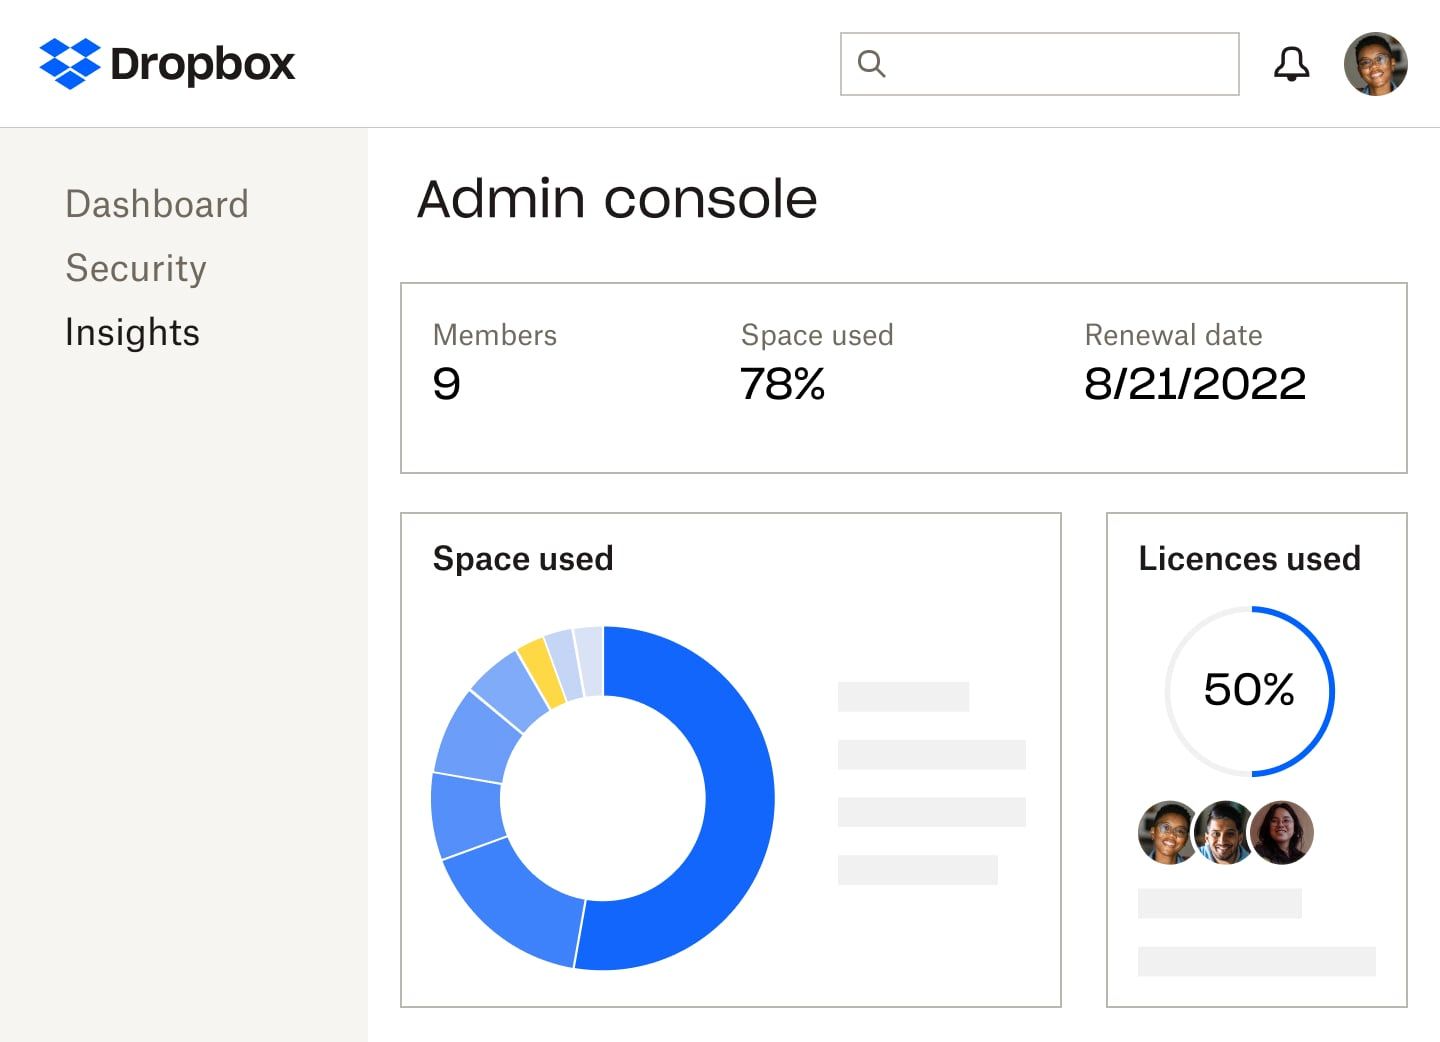  The Dropbox admin console that shows number of members, percent of storage space and licences used, the renewal date of the subscription, and a blue and yellow pie graph of the space used